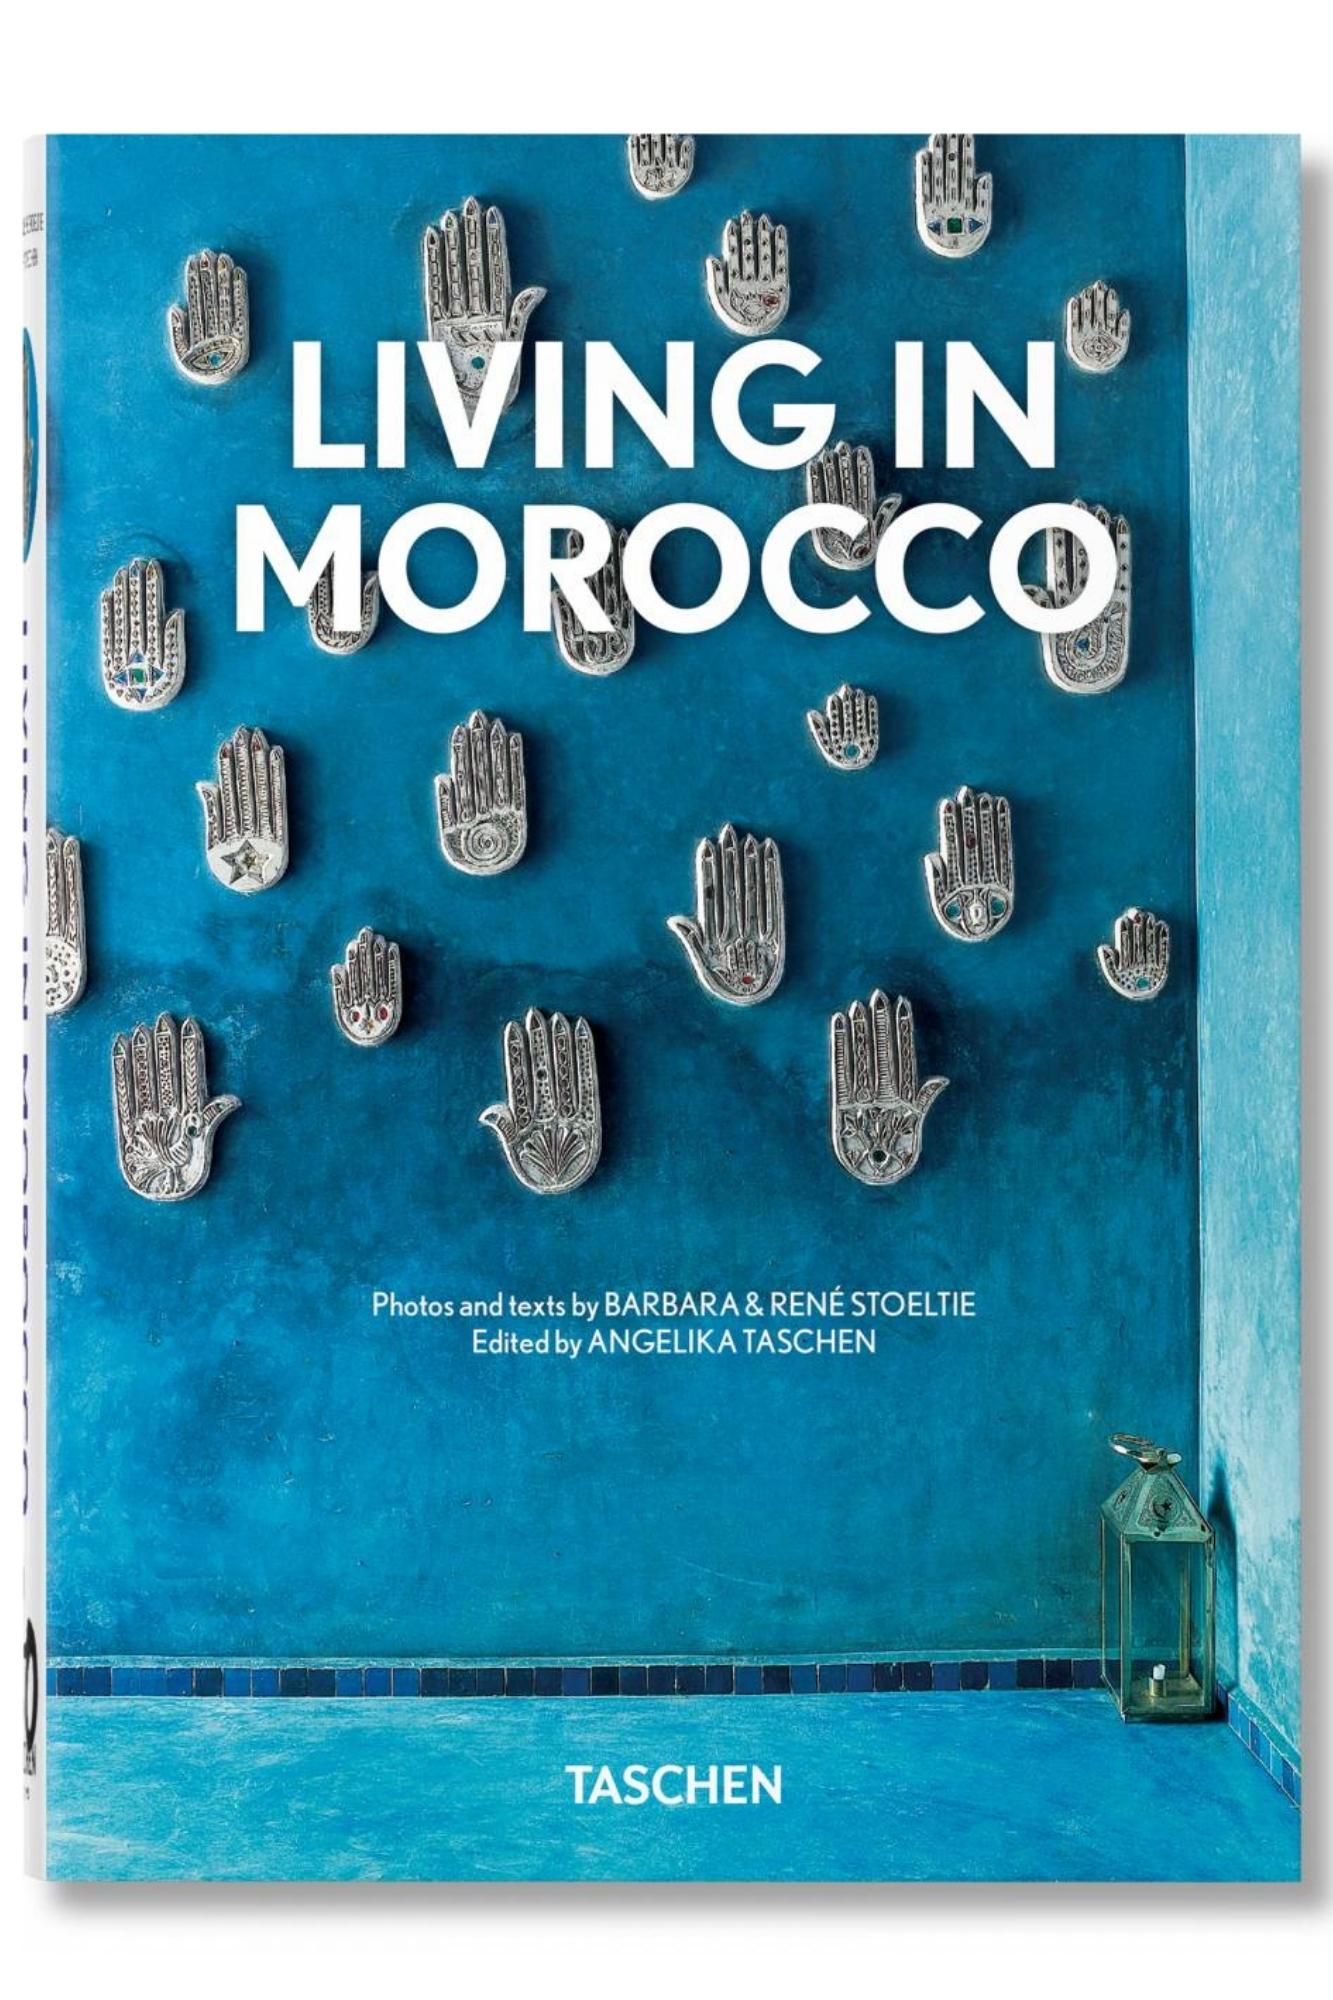     living-in-morocco-40-edition